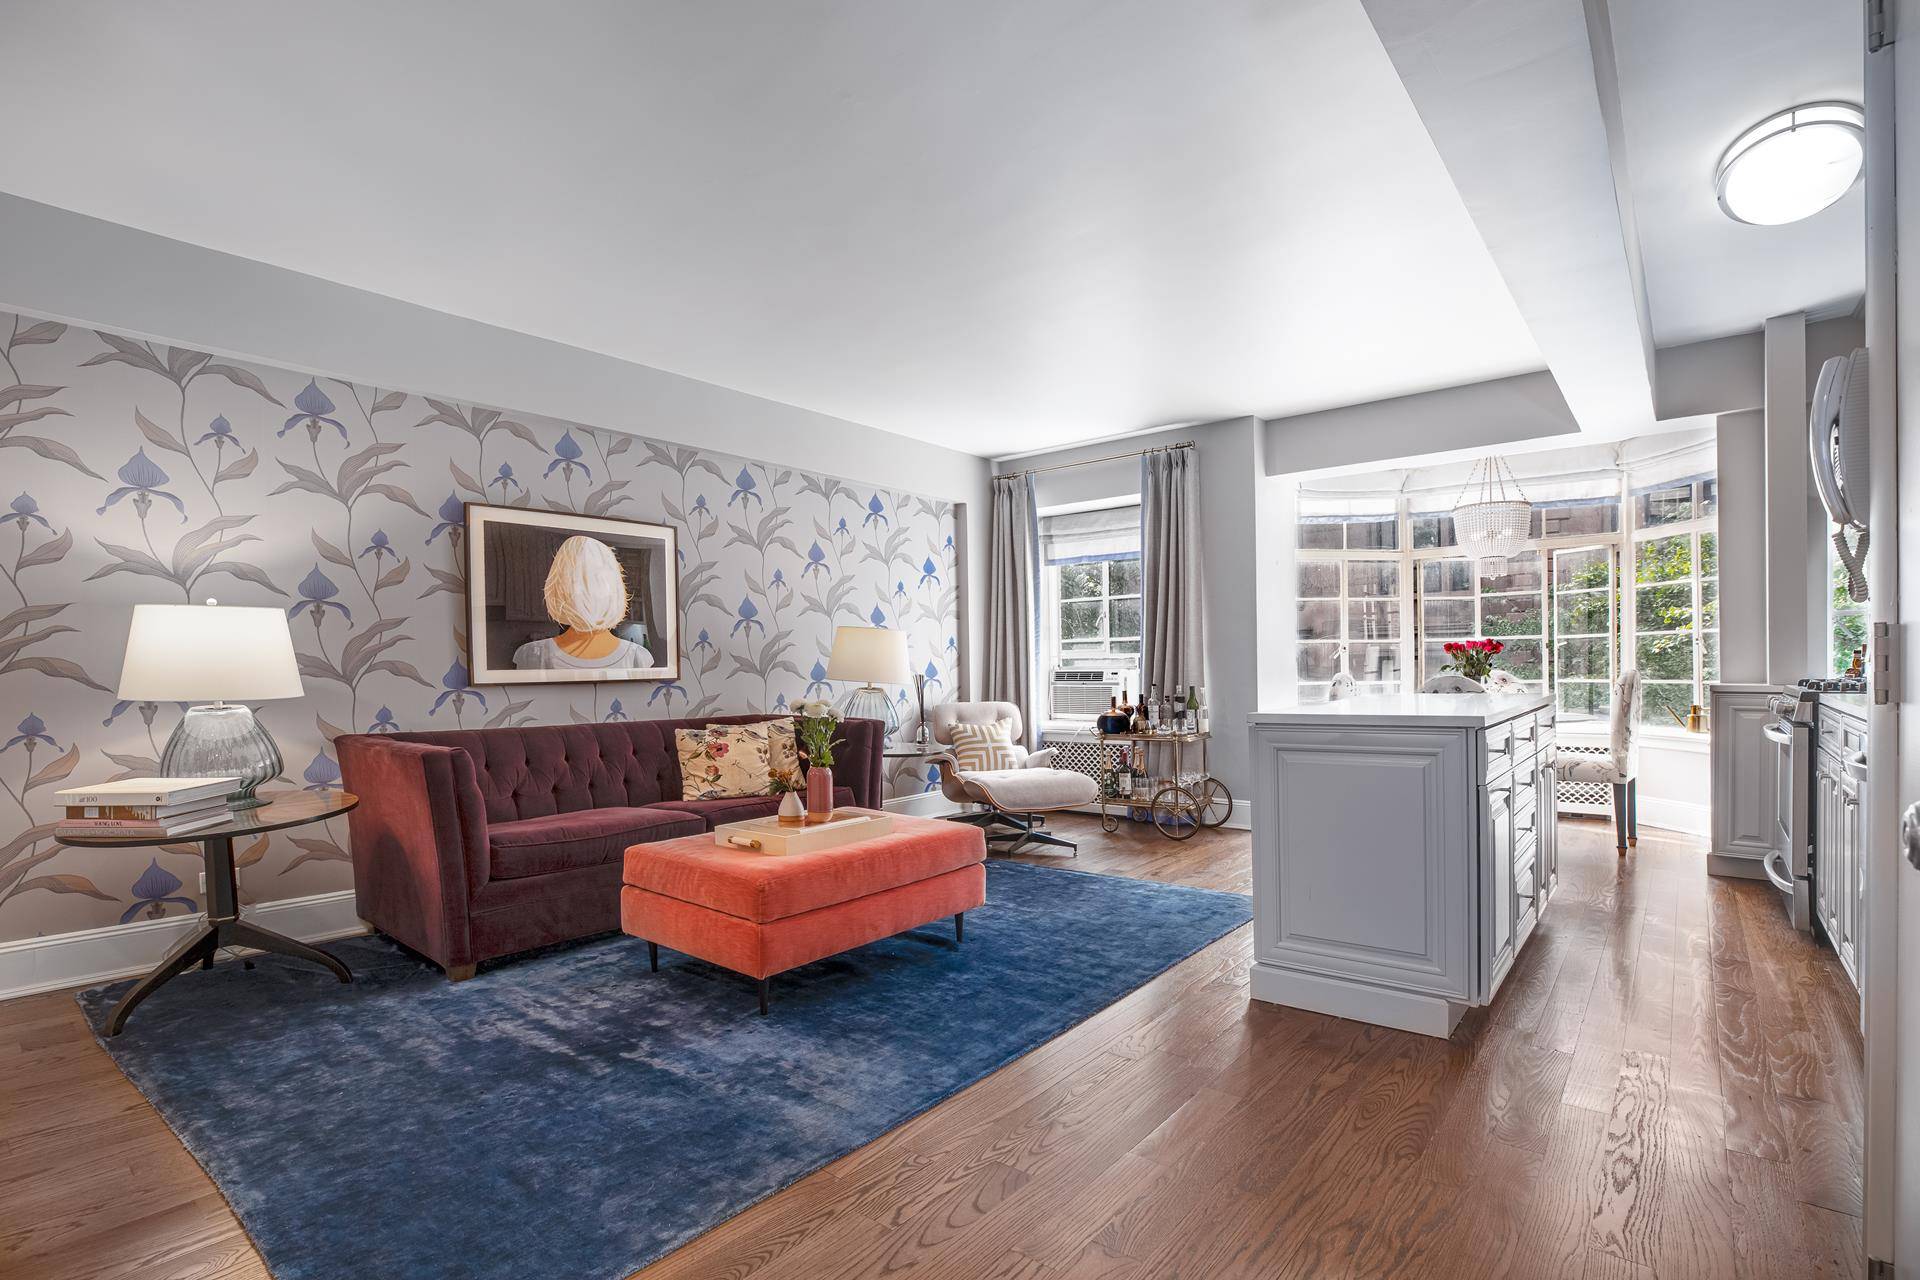 This stunning, spacious one bedroom apartment is now available in The Breukelen, one of Brooklyn Heights's most coveted full service buildings, ideally situated at the entrance to the Brooklyn Promenade.